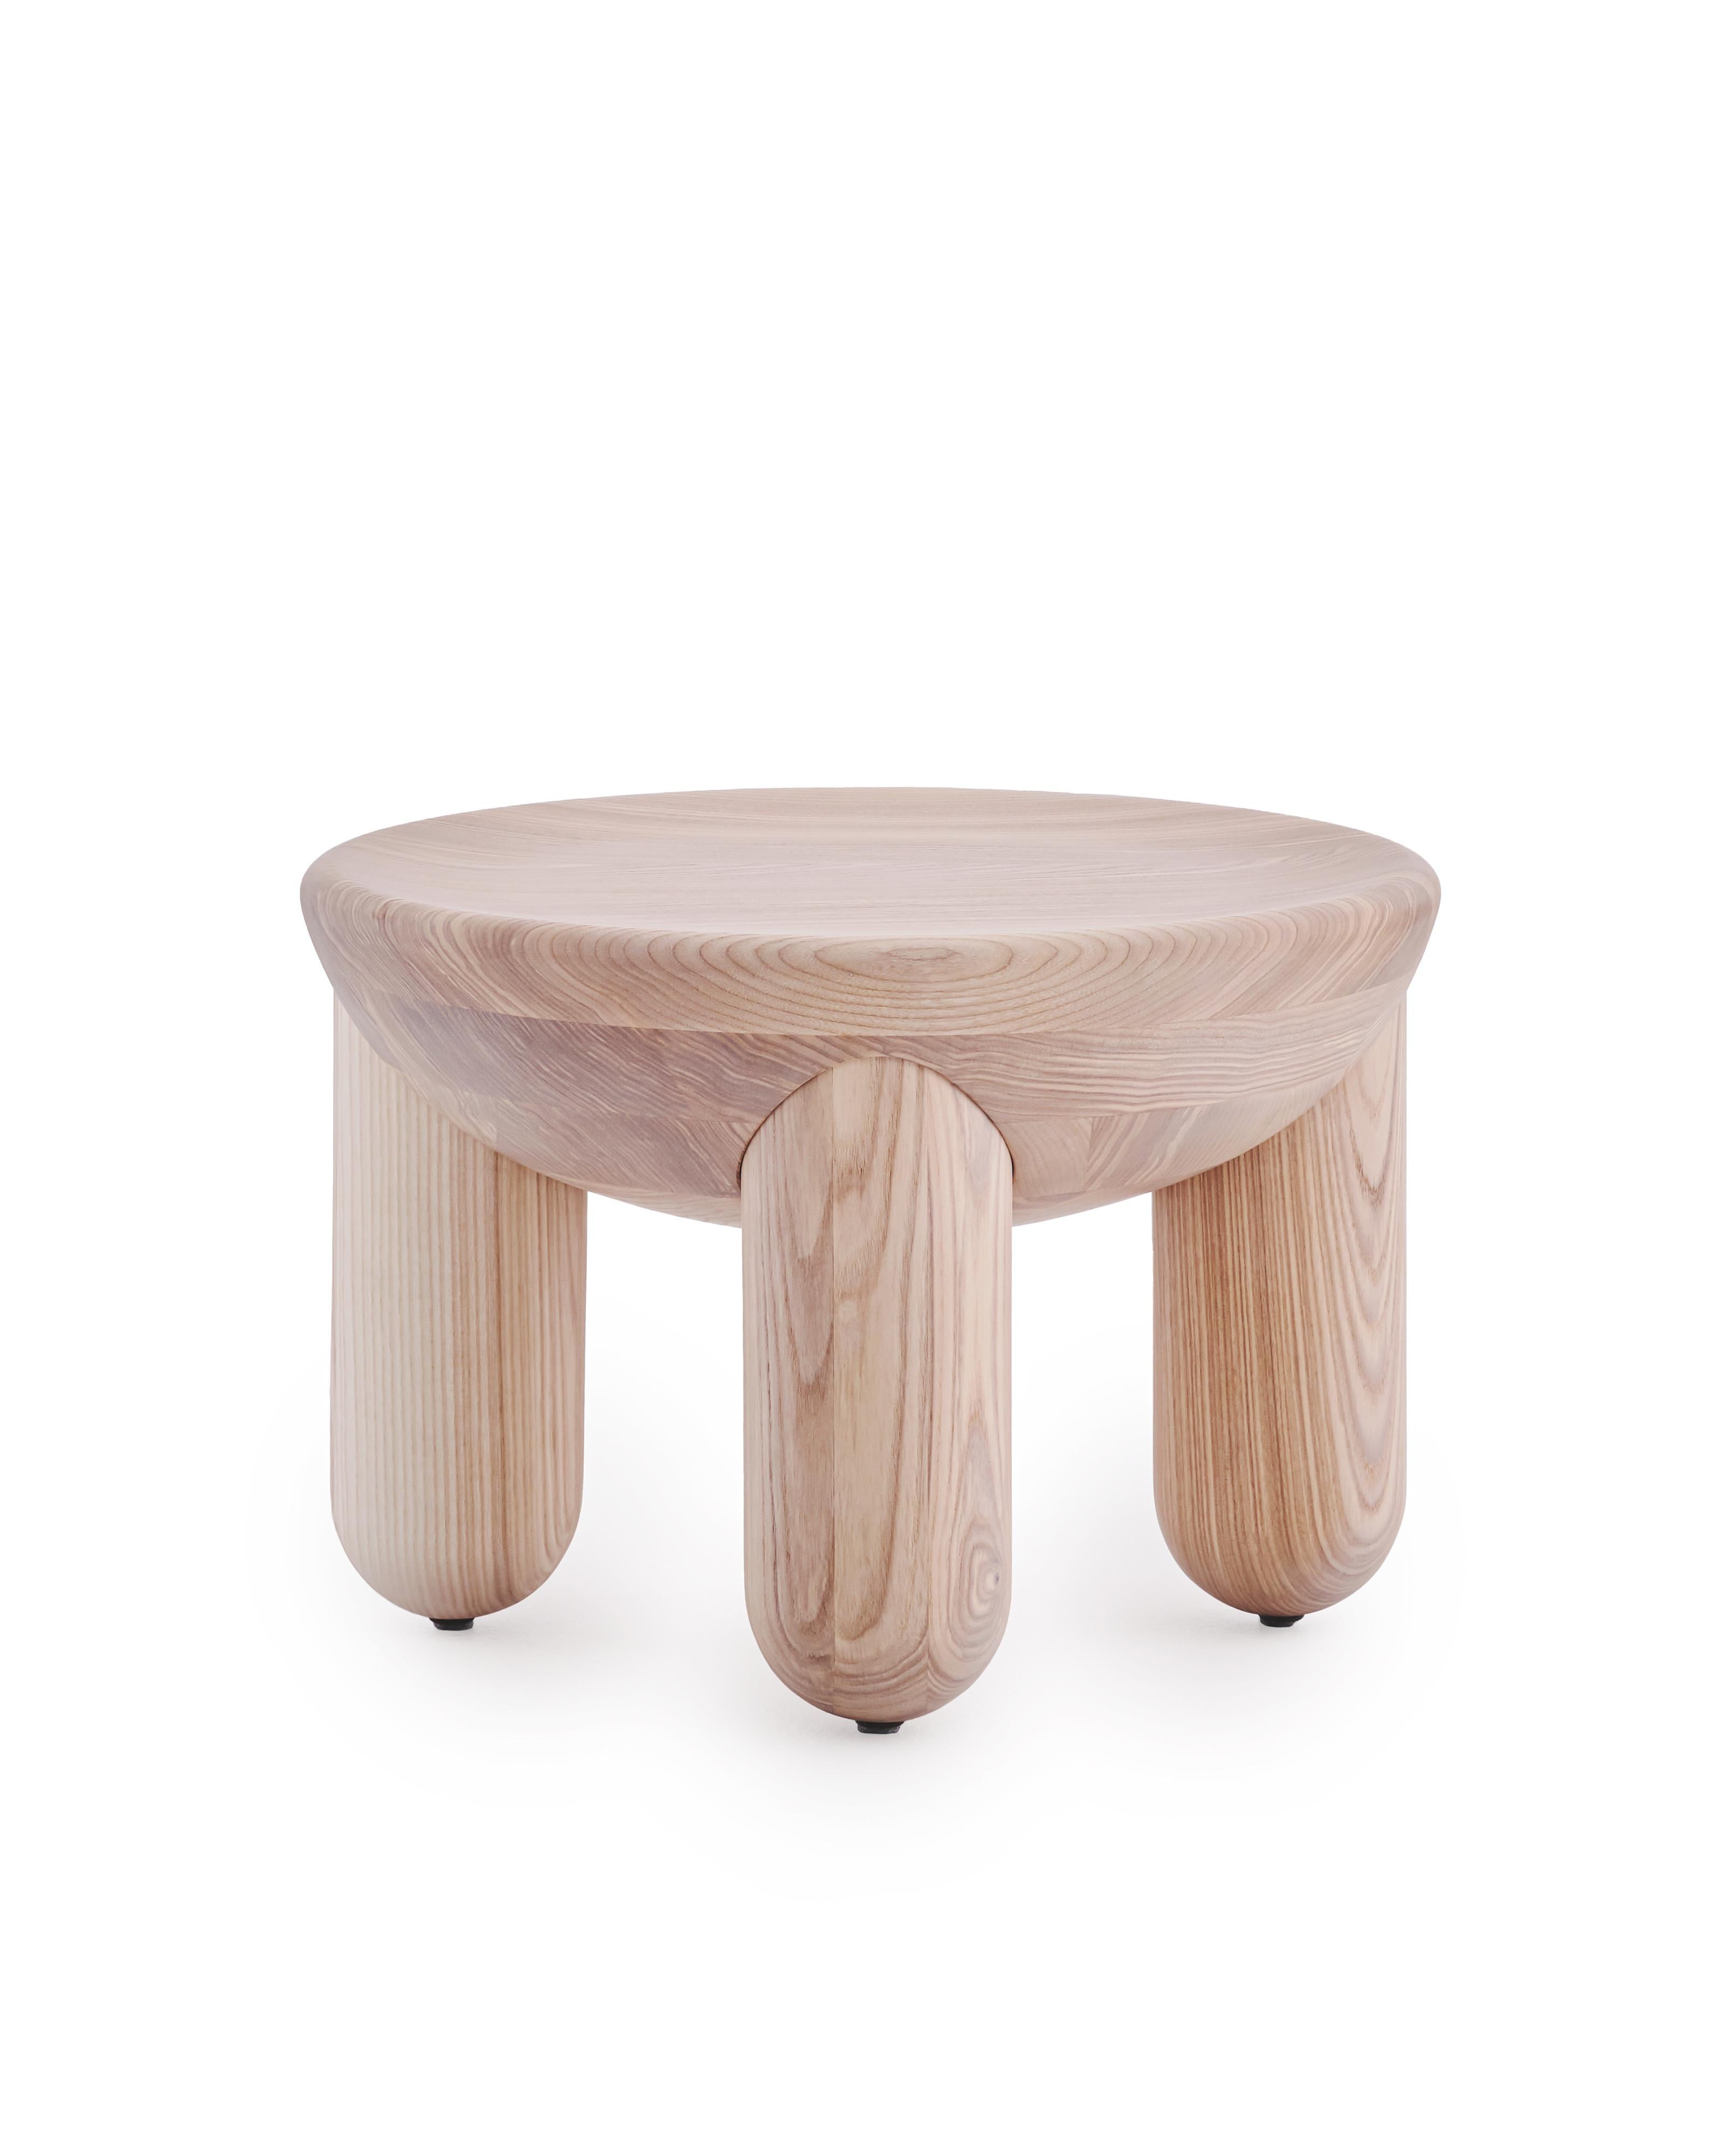 Modern Wooden Coffee Table Freyja 1 in Natural Ash Finish by Noom